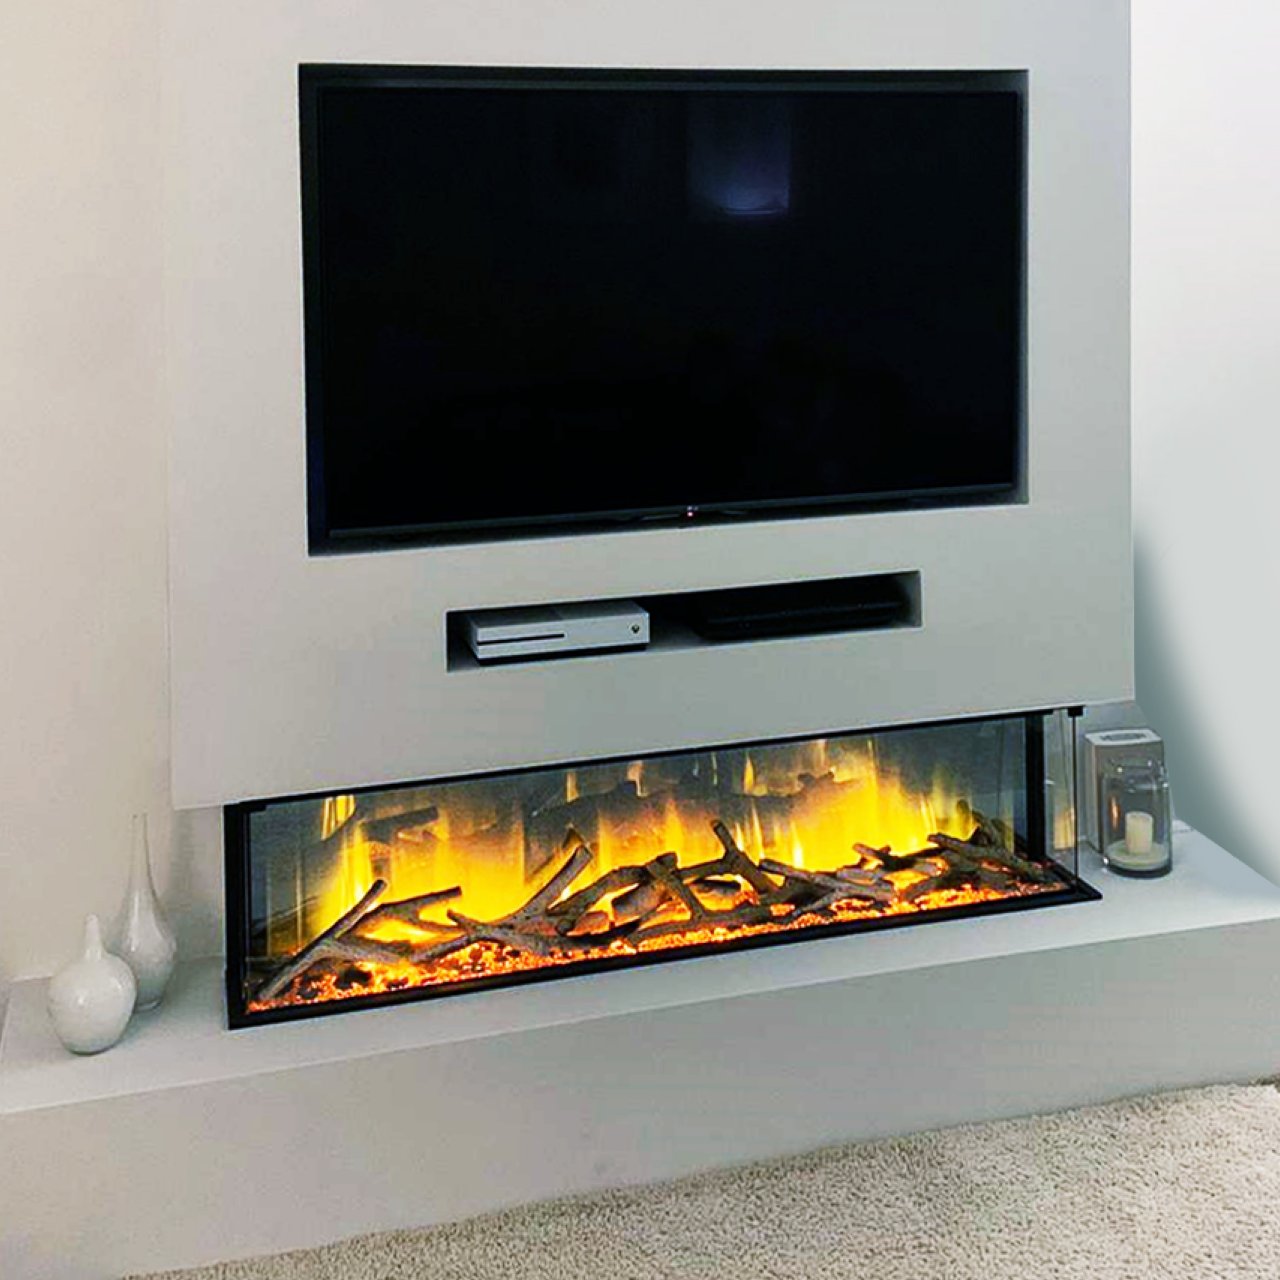 Media Wall Fireplace Package Offer 1, Wall Tv Units With Fireplace